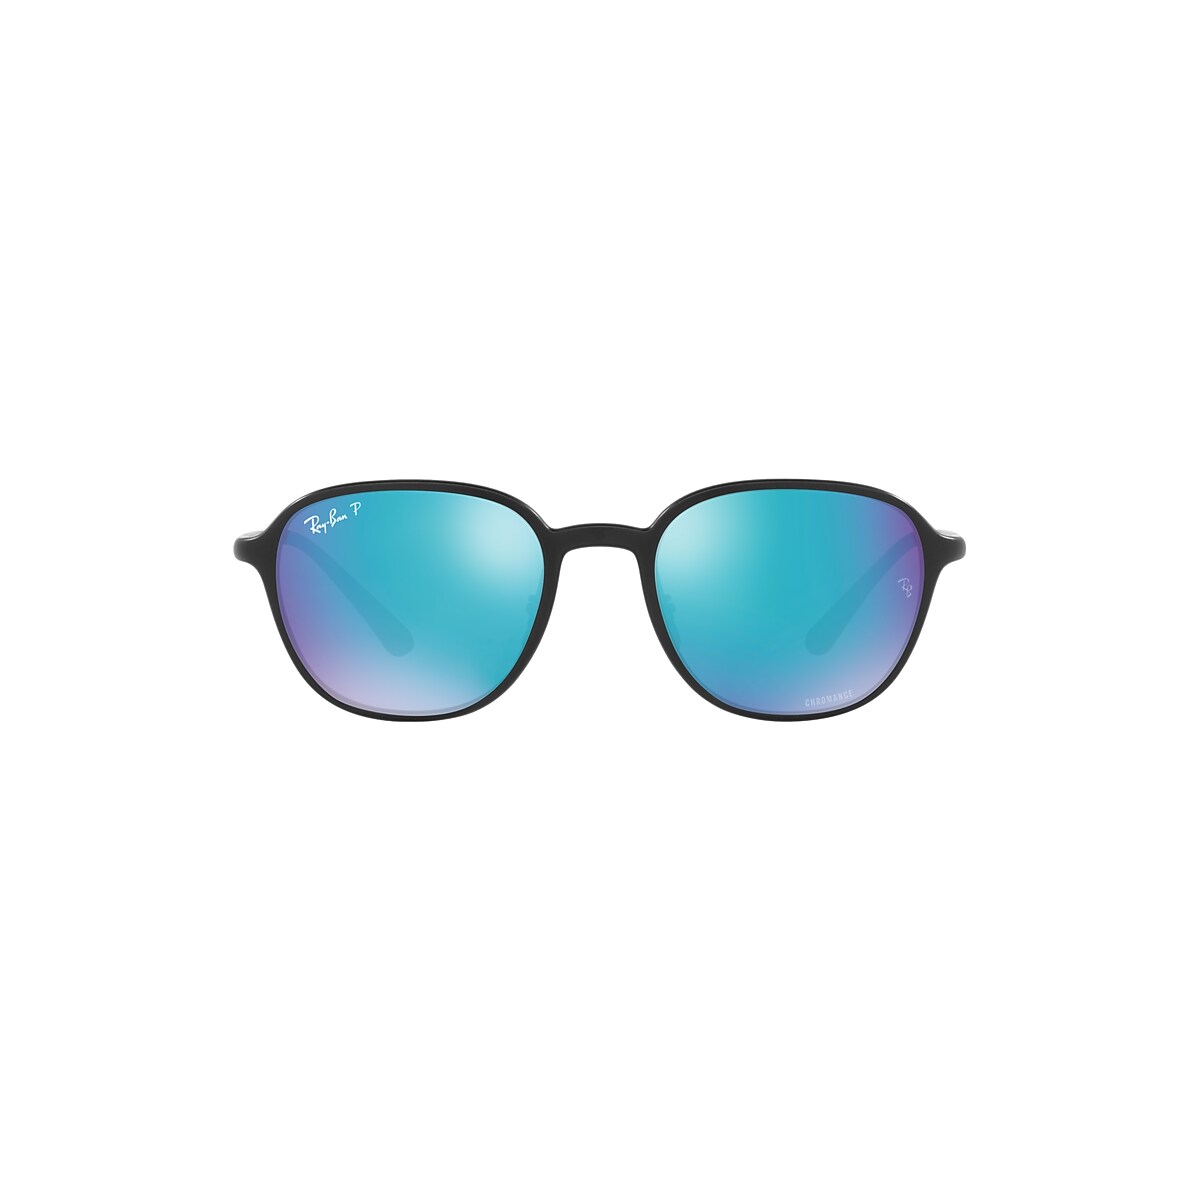 Rb4341ch Chromance Sunglasses in Black and Blue | Ray-Ban®